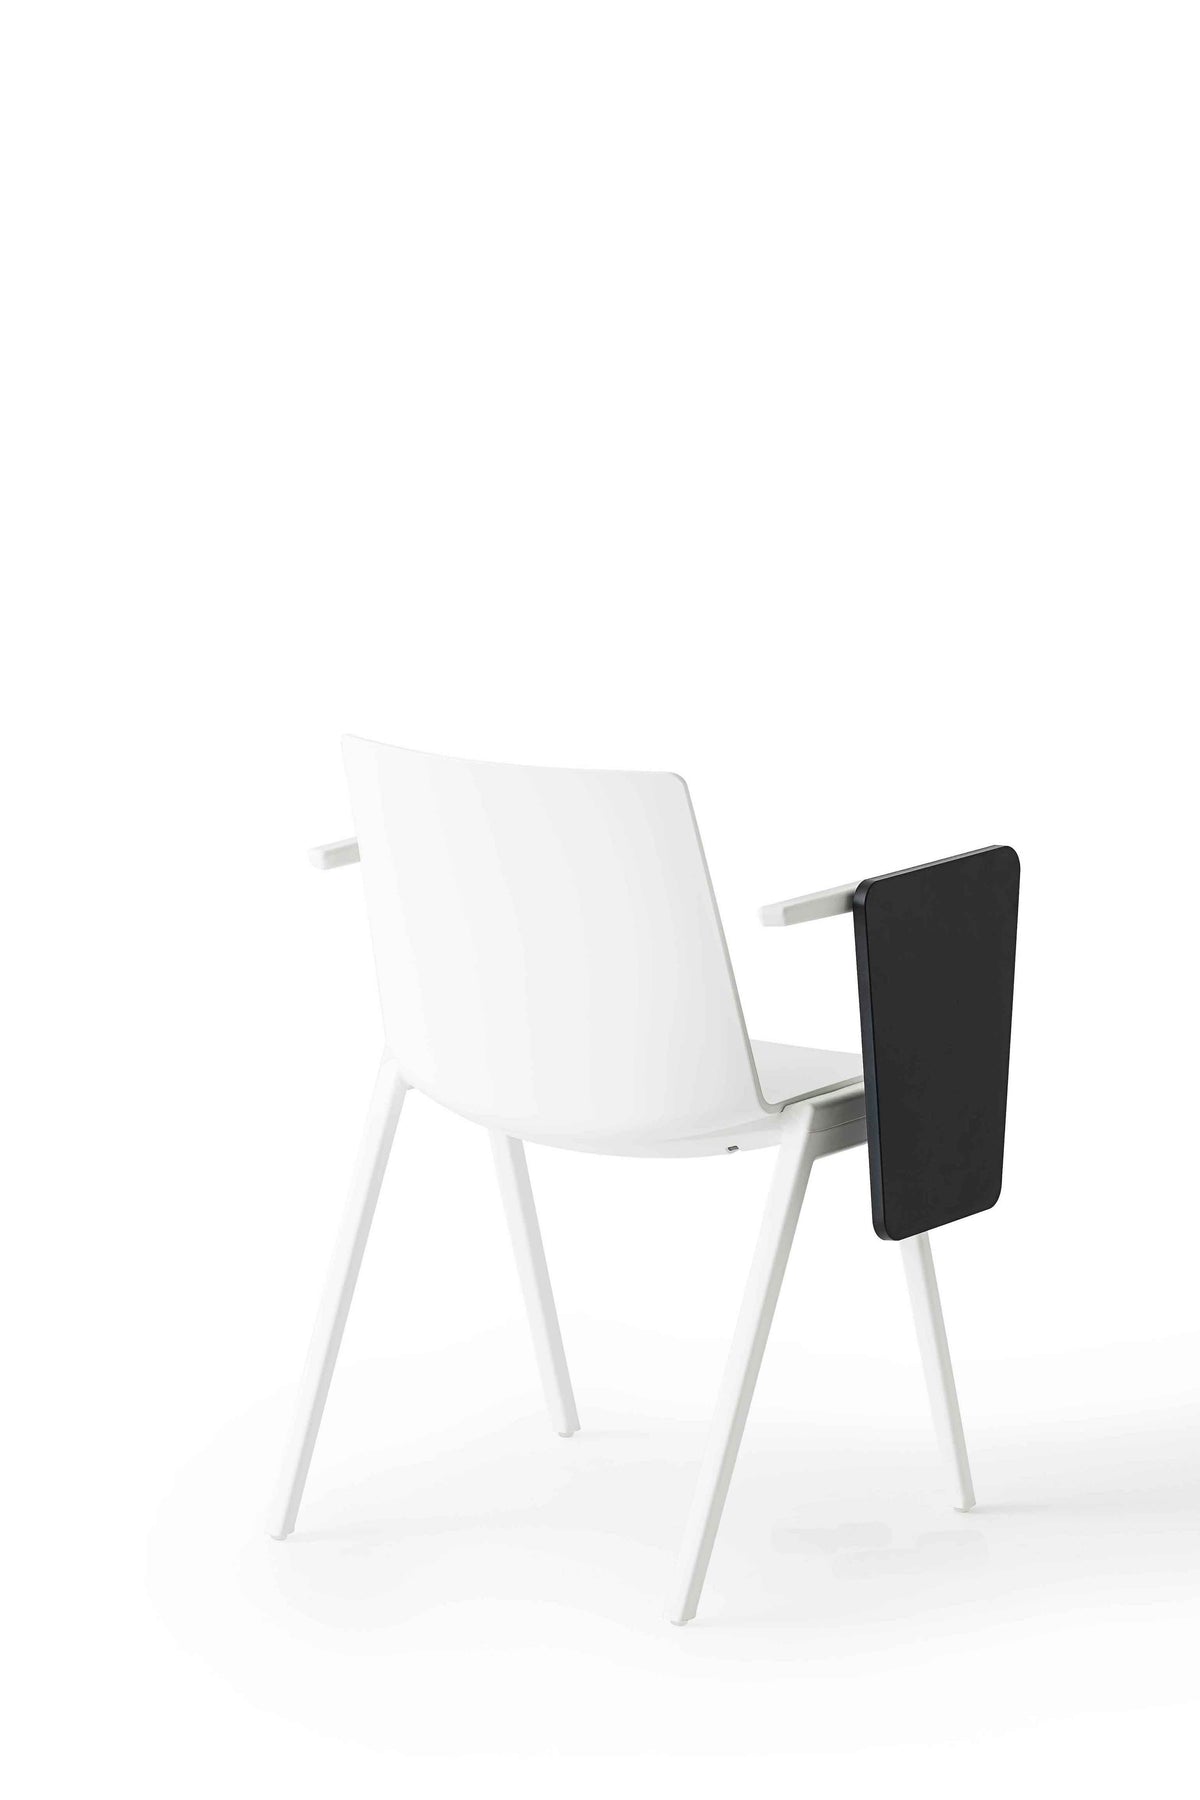 Jubel IVB Armchair-Gaber-Contract Furniture Store